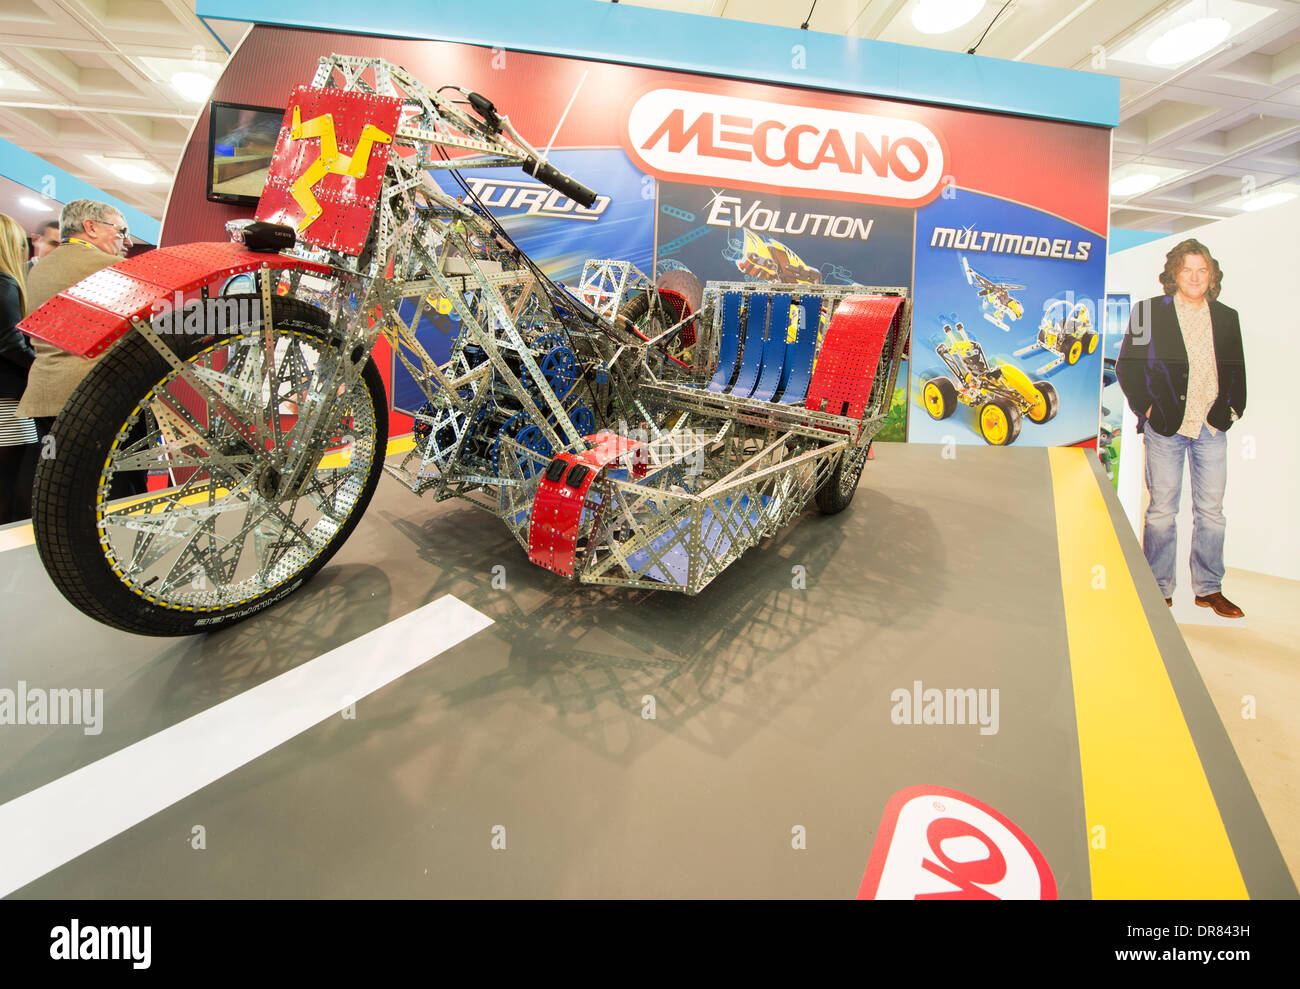 London, UK. 21st January 2014. The full-sized fully working Meccano motorbike and sidecar on display at the Toy Fair. This model was created for the James May’s Toy Stories TV programme and completed the Isle of Man TT circuit. The Toy Fair will once again be showcasing thousands of brand new toys, games and hobbies to the UK's largest gathering of toy industry professionals.  Credit: Malcolm Park editorial/Alamy Live News Stock Photo